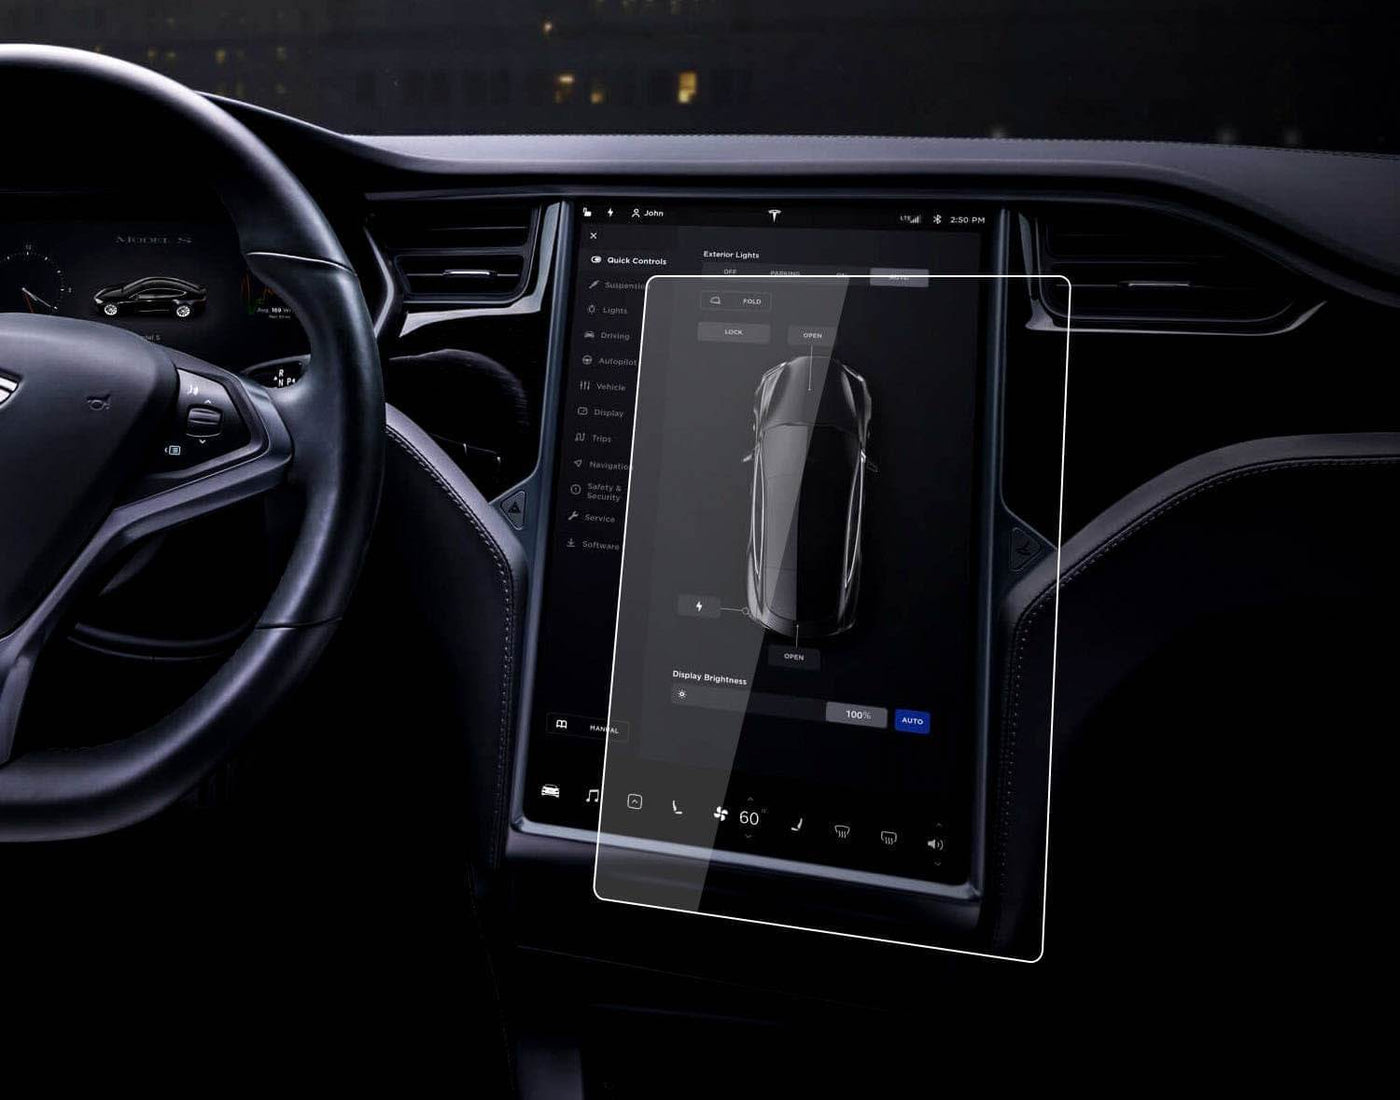 Tesla Accessories That Add To Your Tesla’s Luxury Vibe